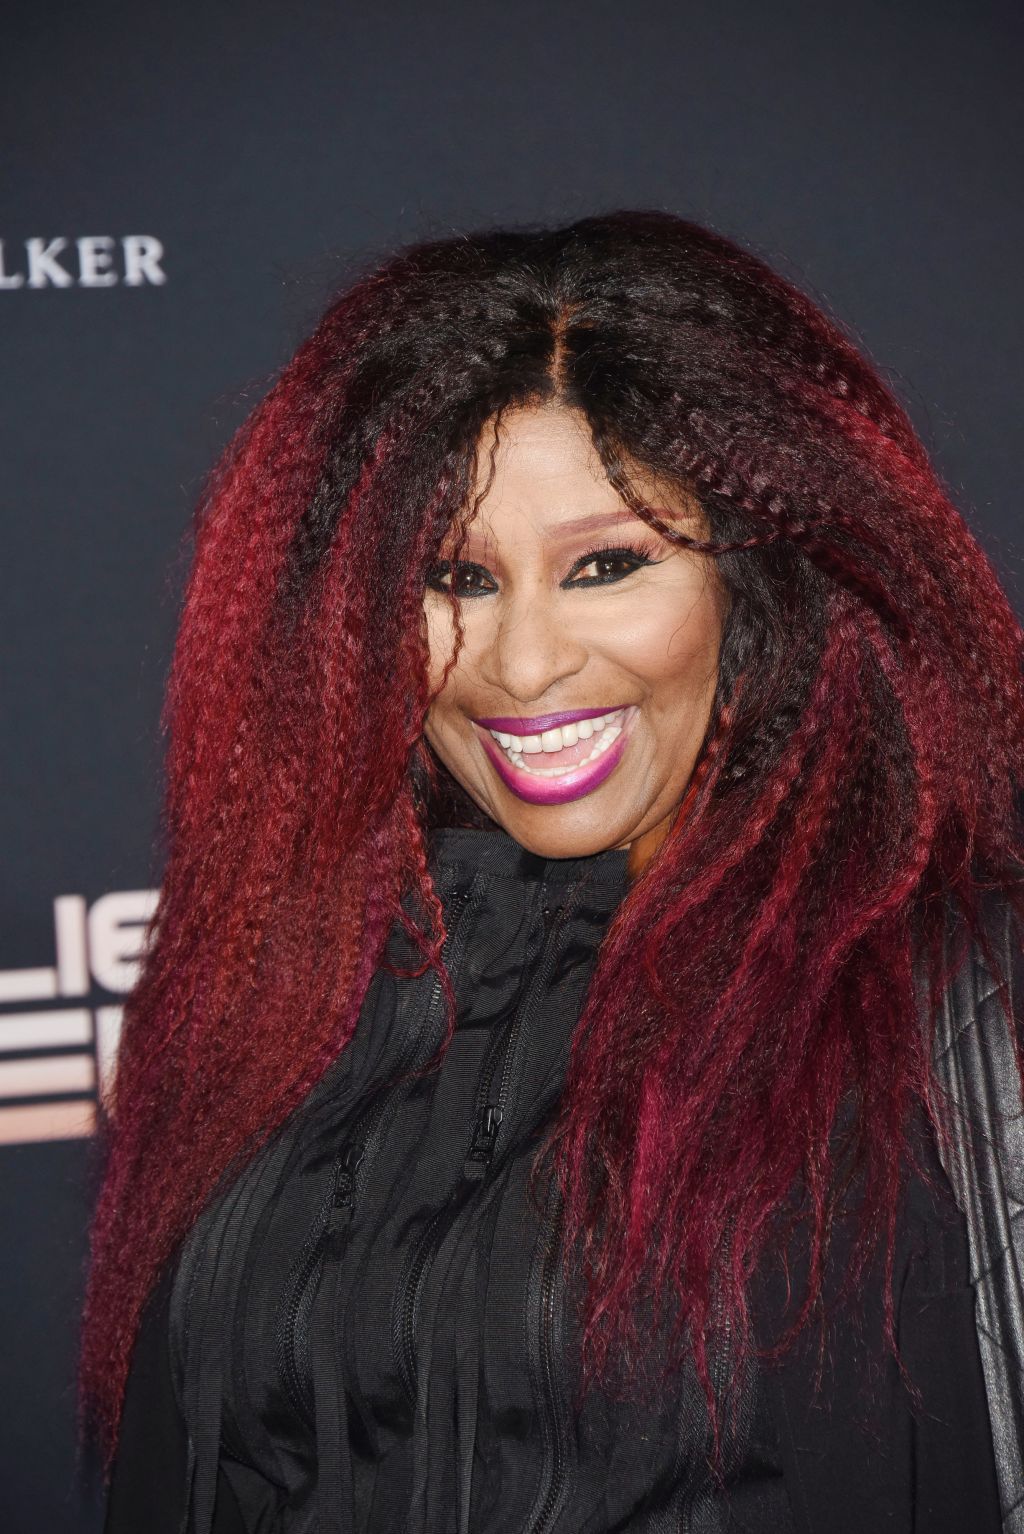 Chaka Khan attends the premiere of Columbia Pictures&apos; "Charlie&apos;s Angels" at Westwood Regency Theater on November 11, 2019 in Los Angeles, California\n© Jill Johnson/jpistudios.com